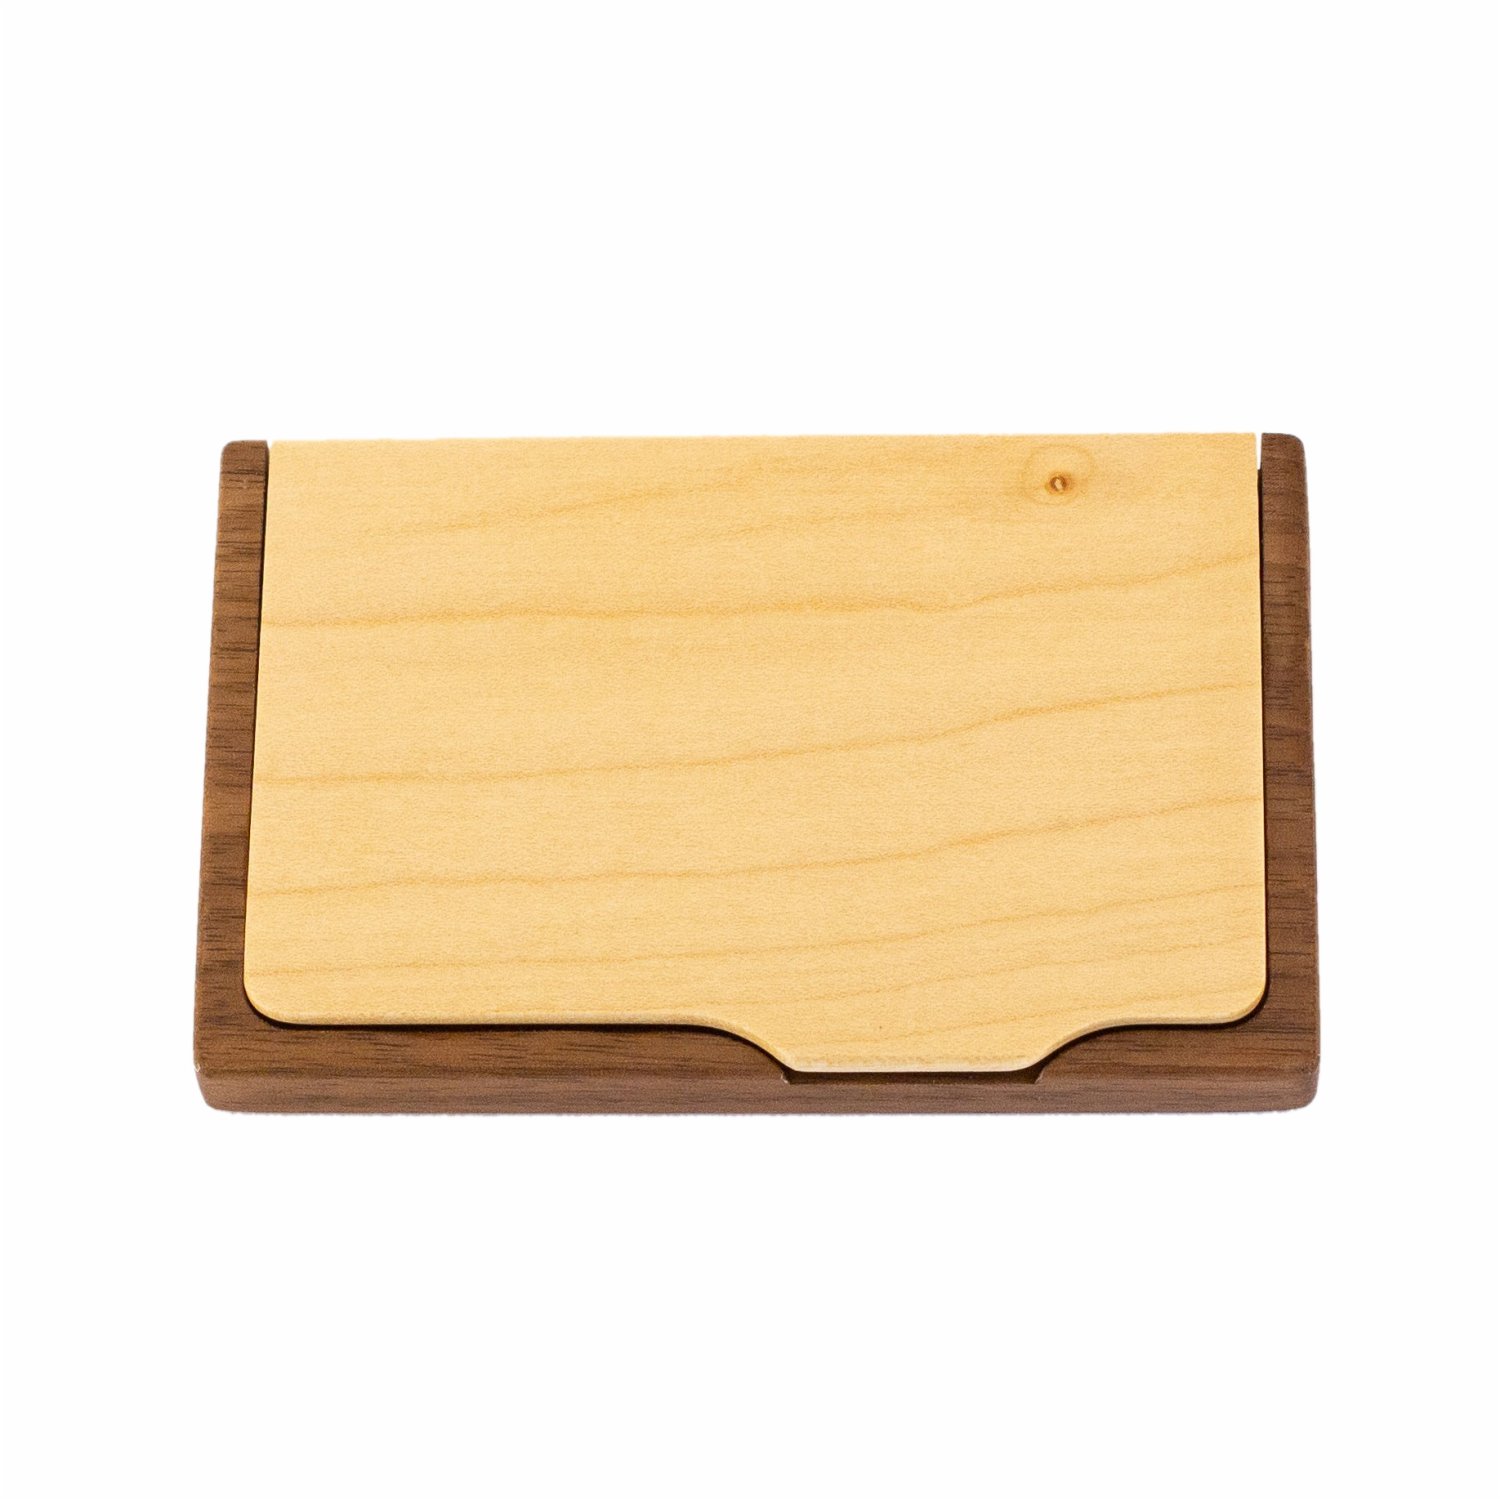 noble wooden case for business cards made of two types of wood